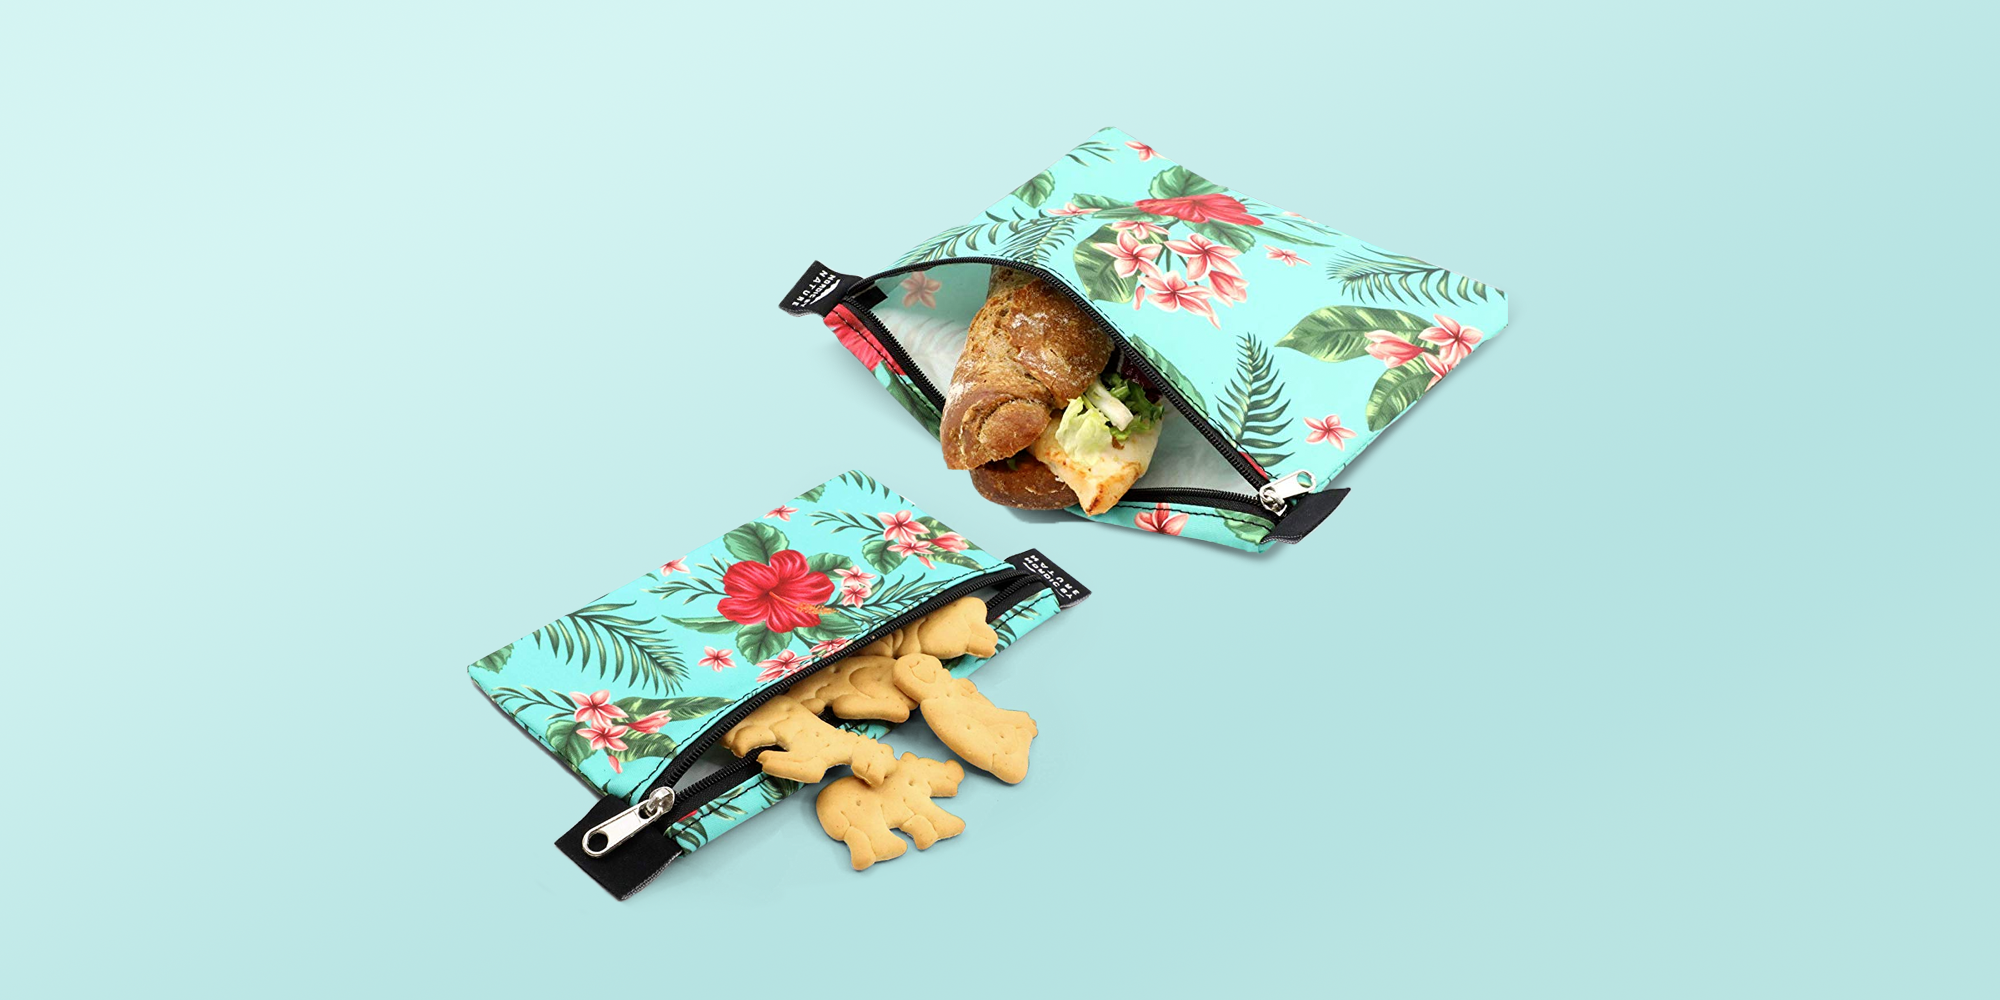 9 Reusable Snack Bags for Packed Lunches